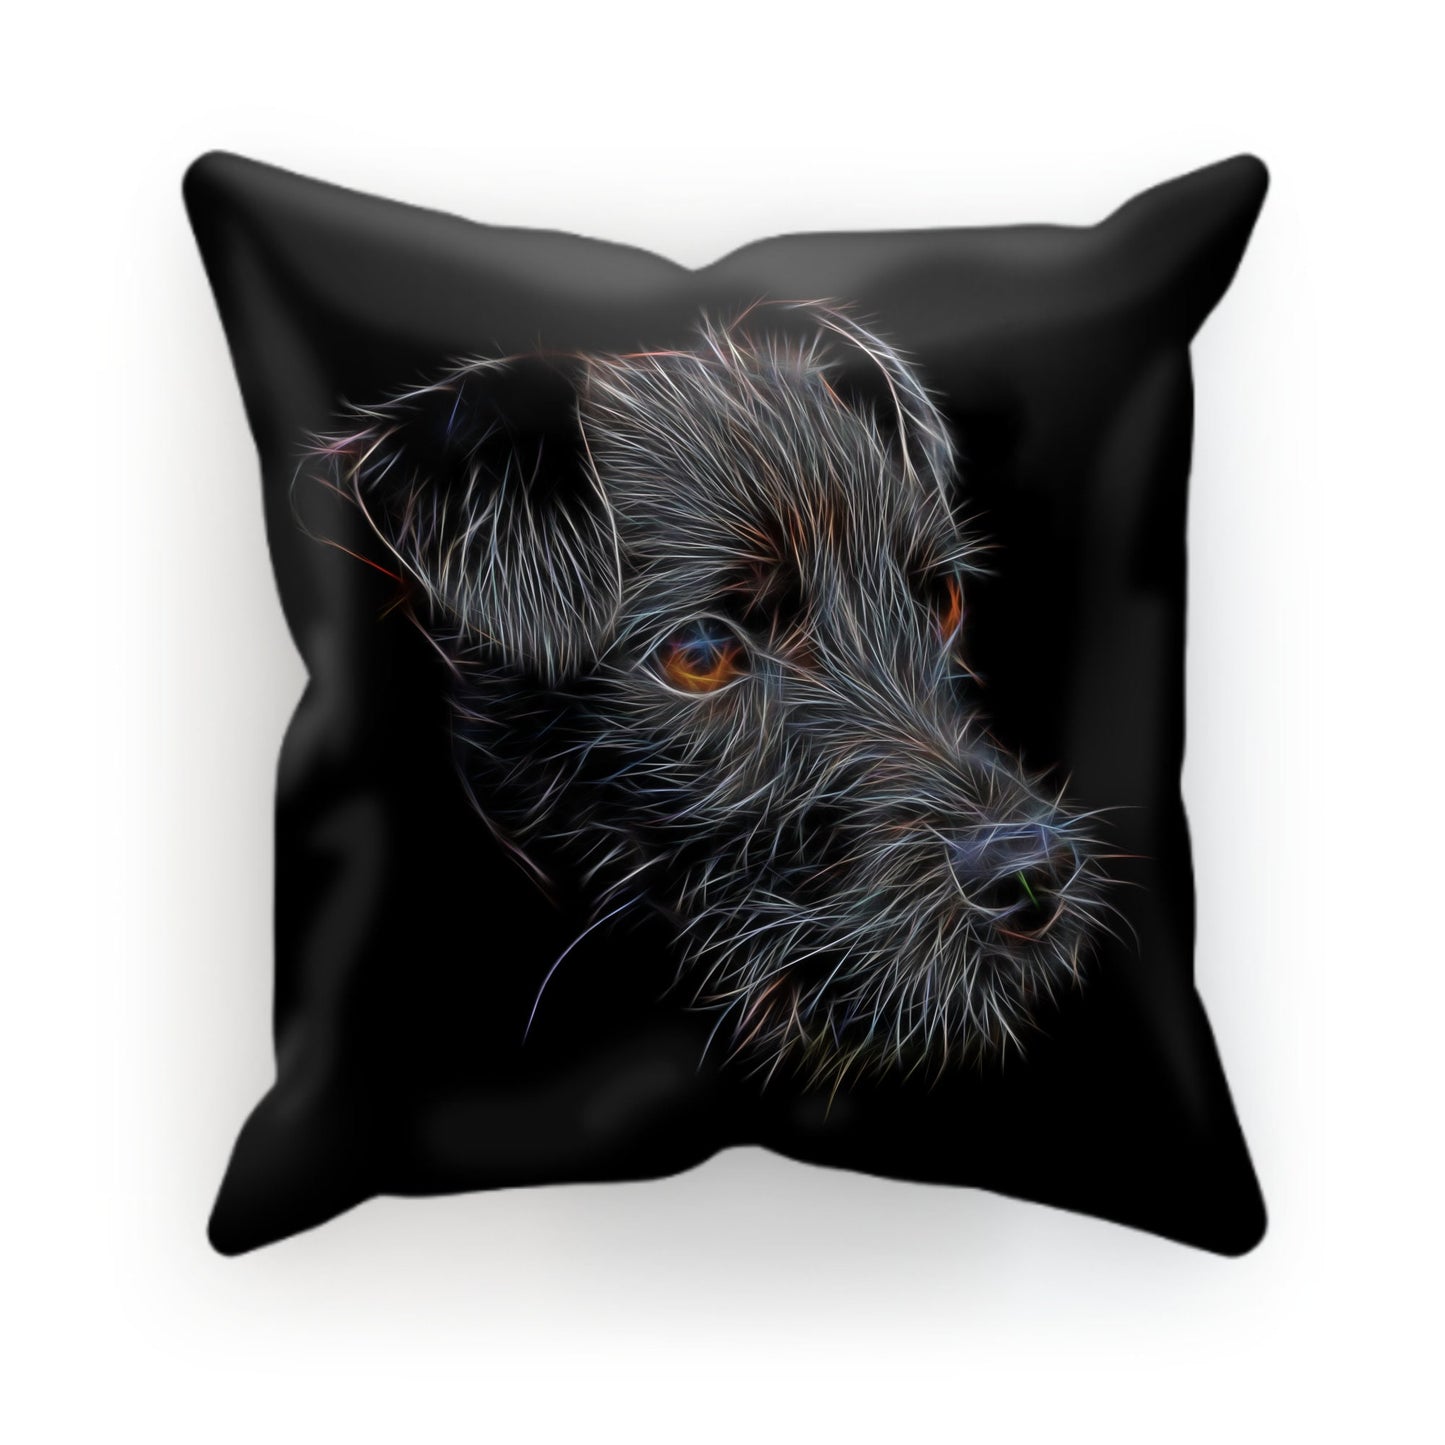 Patterdale Terrier Cushion and Insert